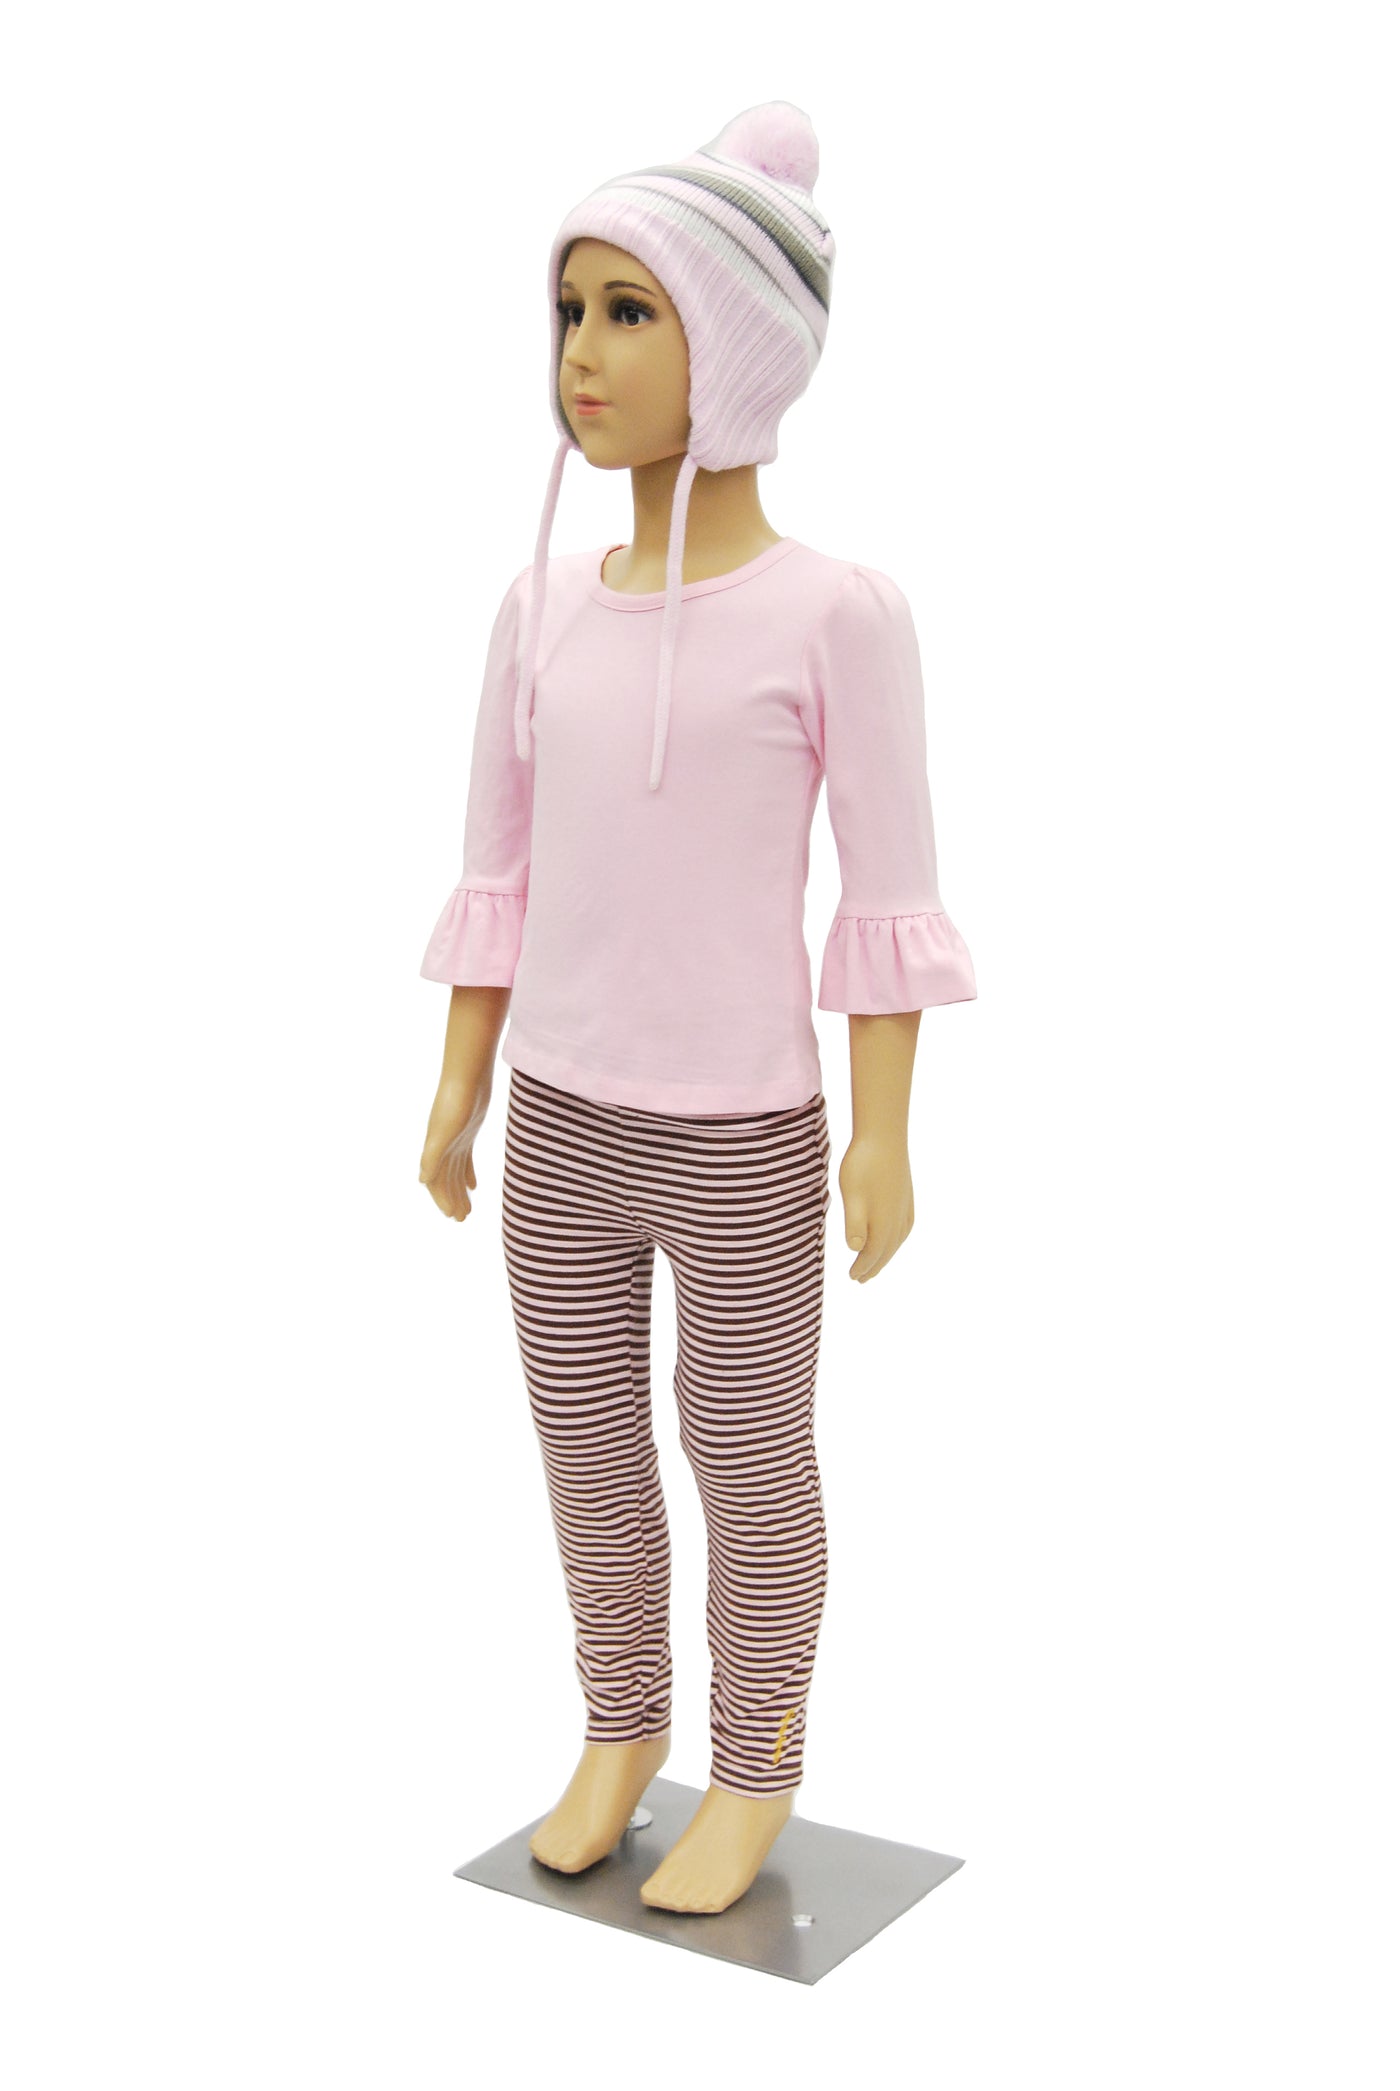 Youth Mannequin -- 44" Tall